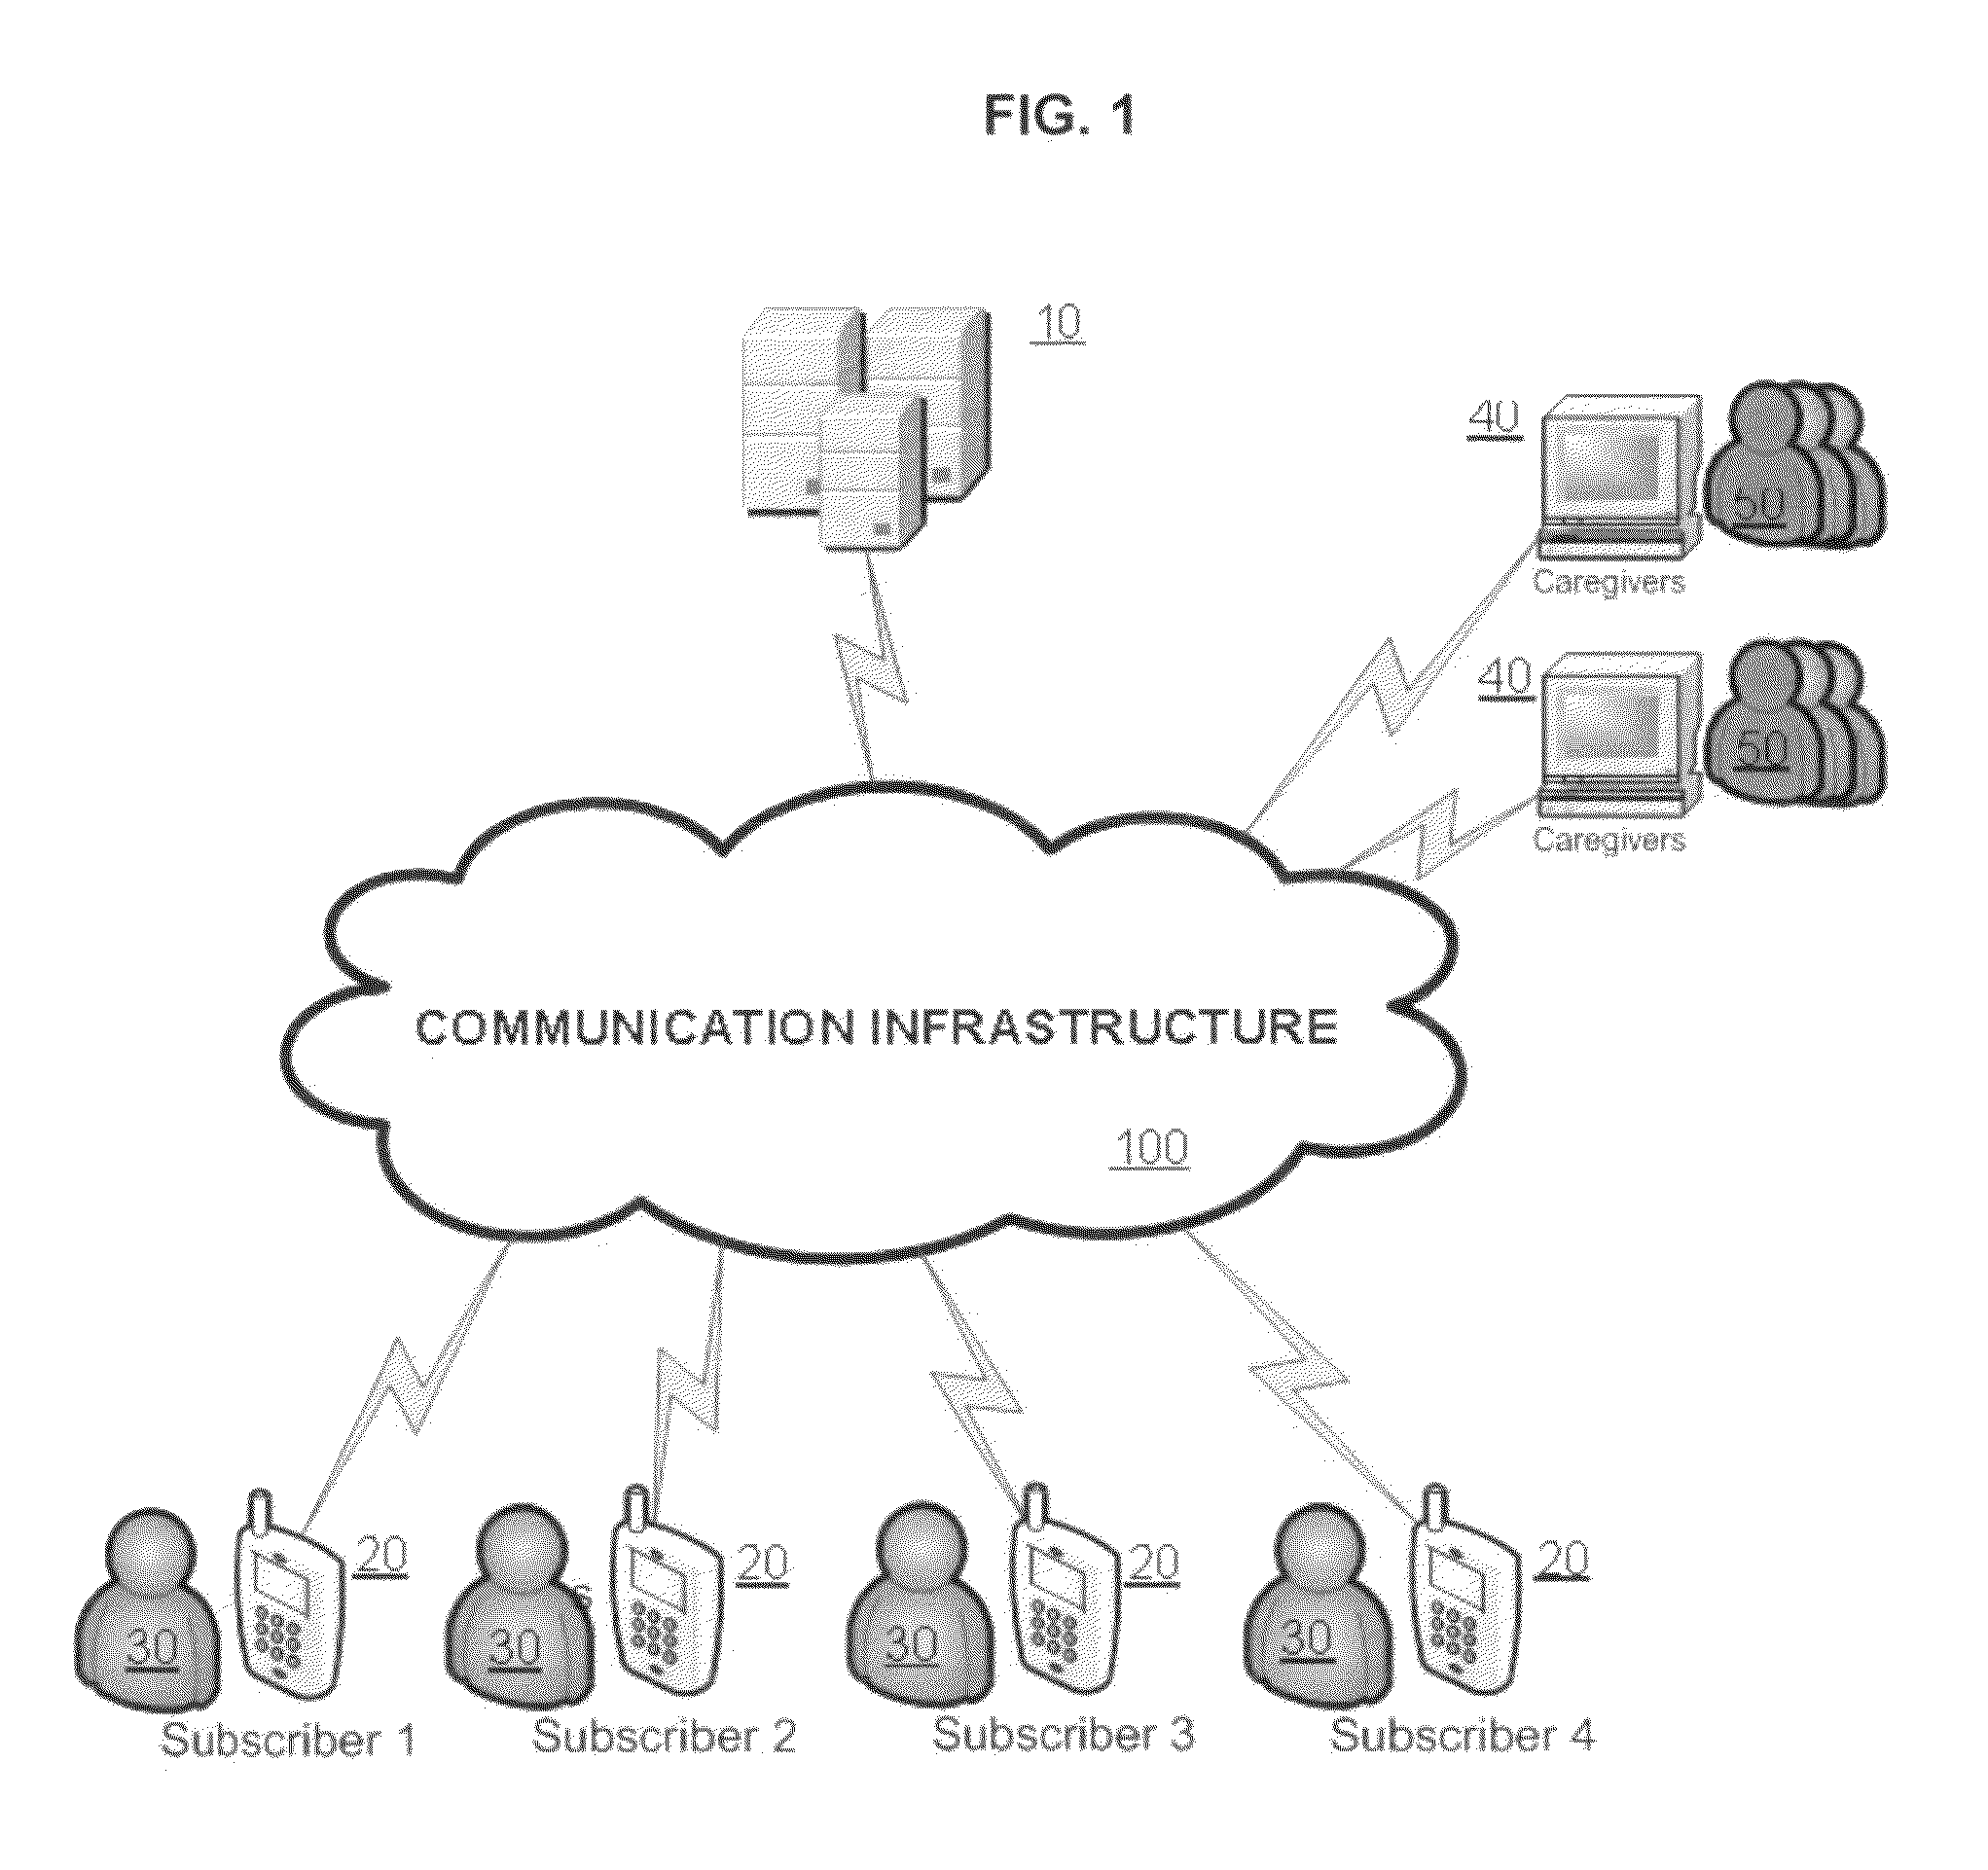 Method, system and apparatus for encouraging frequent and purposeful electronic communications from caregivers to individuals with impaired memory